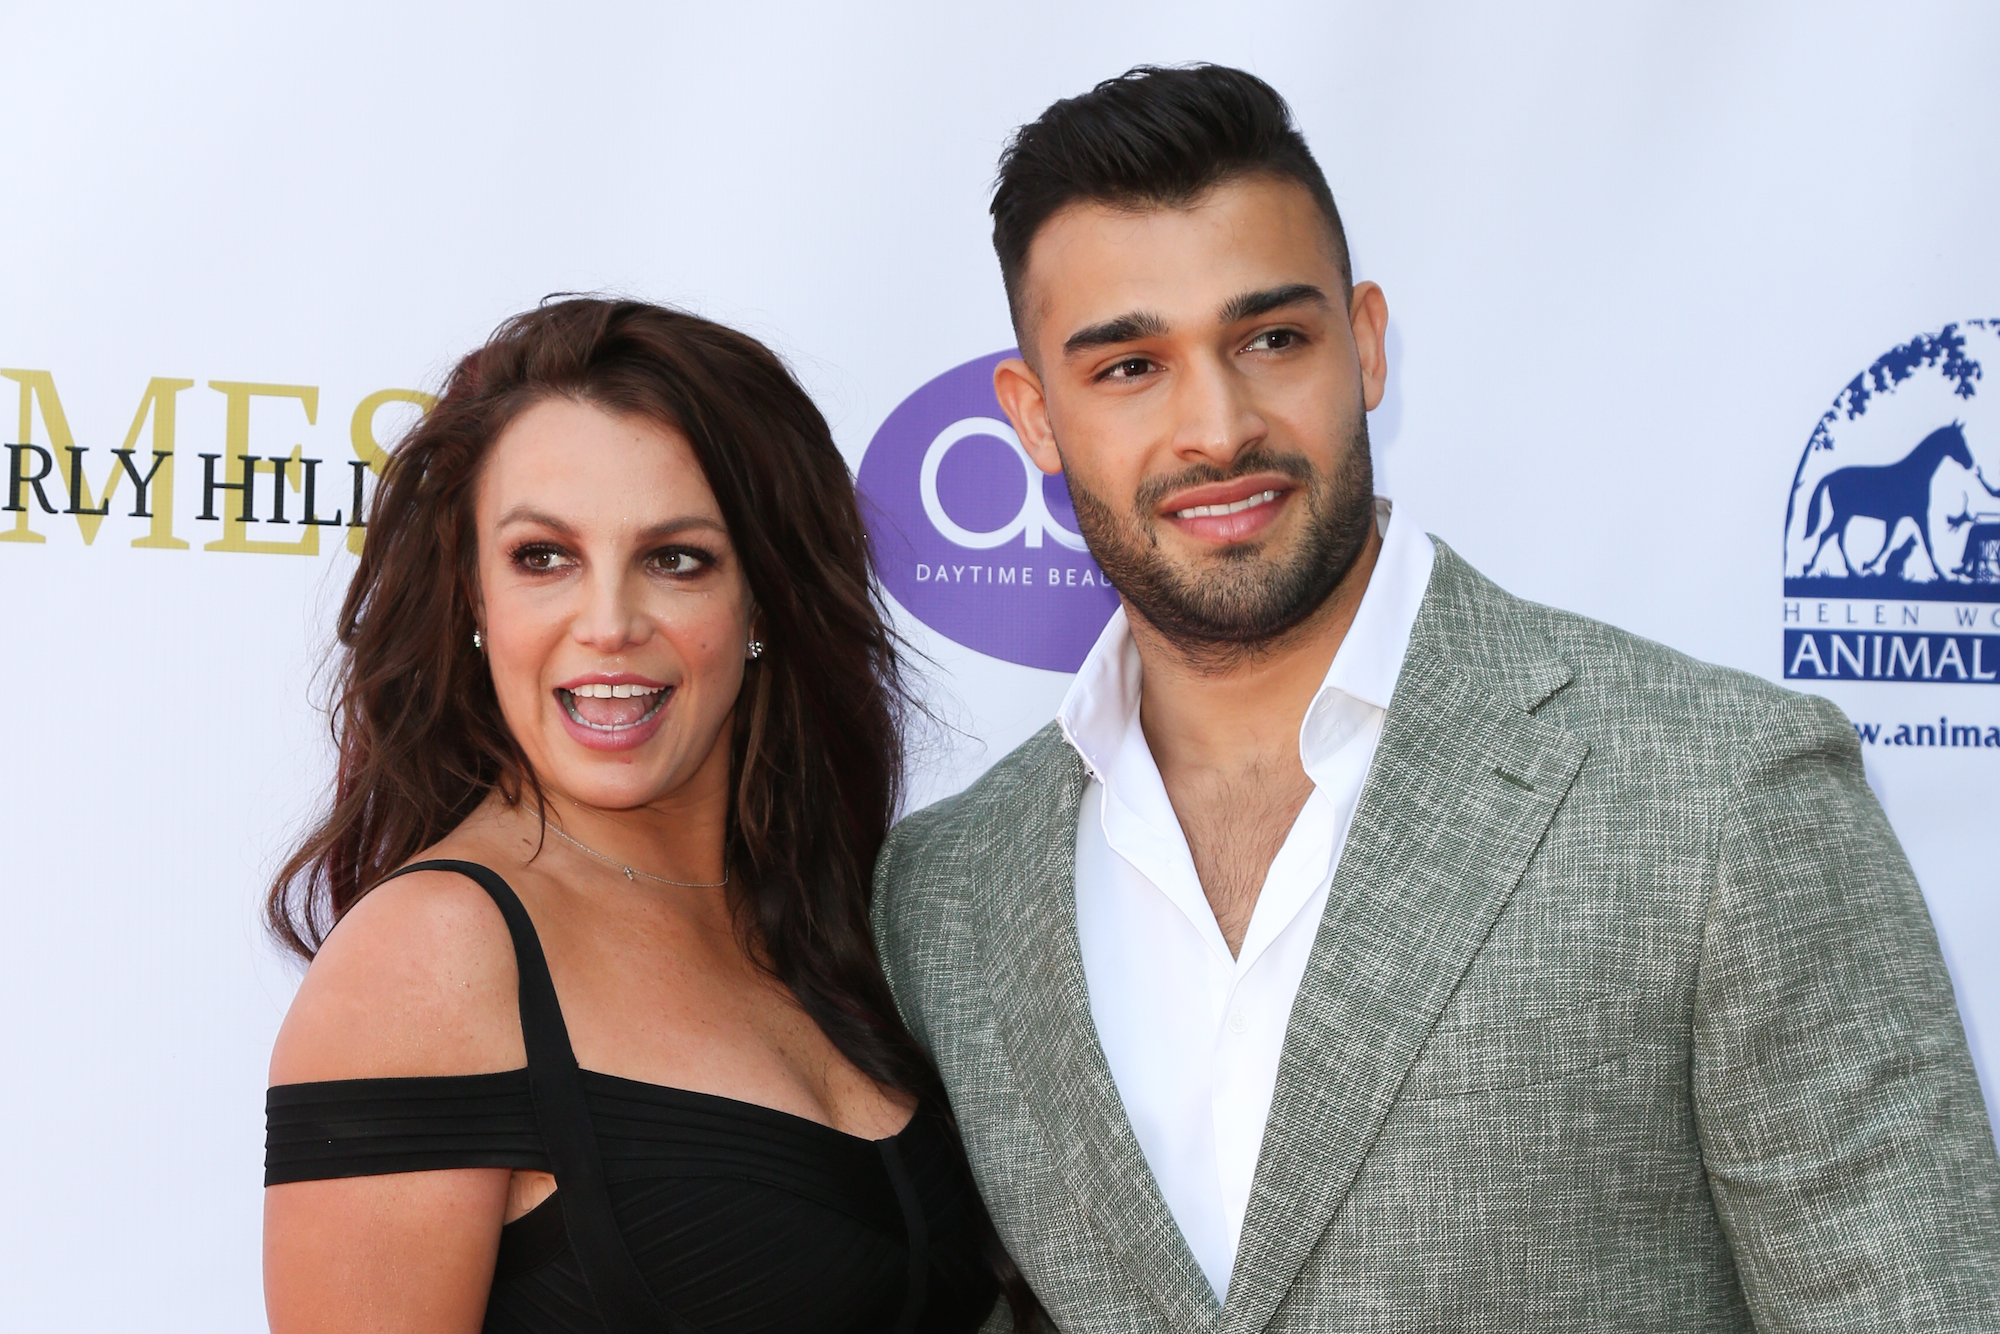 Britney Spears (L) and Sam Asghari (R) attend the 2019 Daytime Beauty Awards 